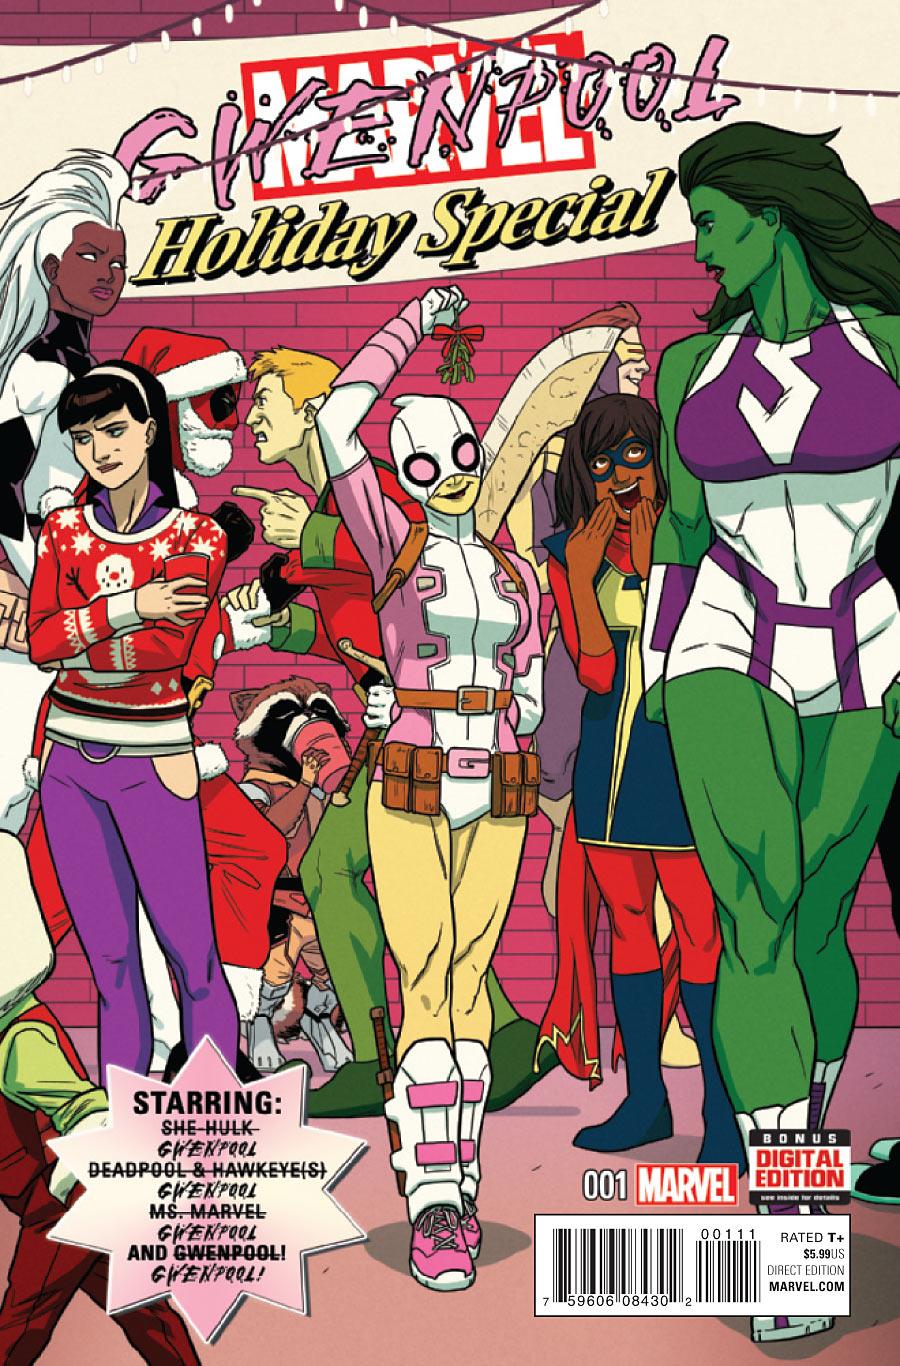 Gwenpool Special Vol. 1 #1